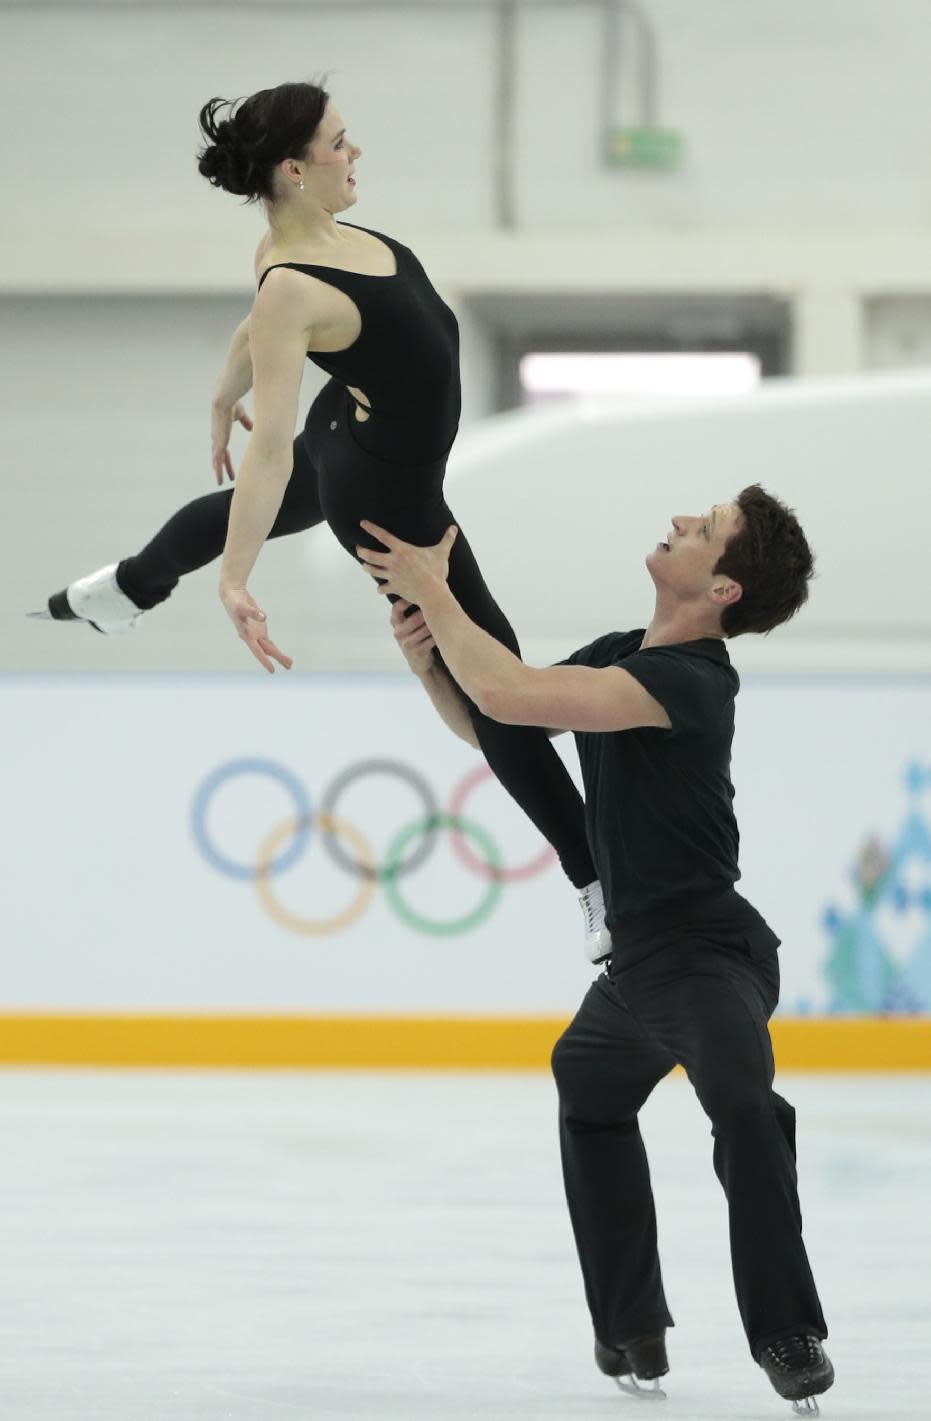 Canada's Tessa Virtue and Scott Moir skate at the figure skating practice rink ahead of the 2014 Winter Olympics, Wednesday, Feb. 5, 2014, in Sochi, Russia. (AP Photo/Ivan Sekretarev)